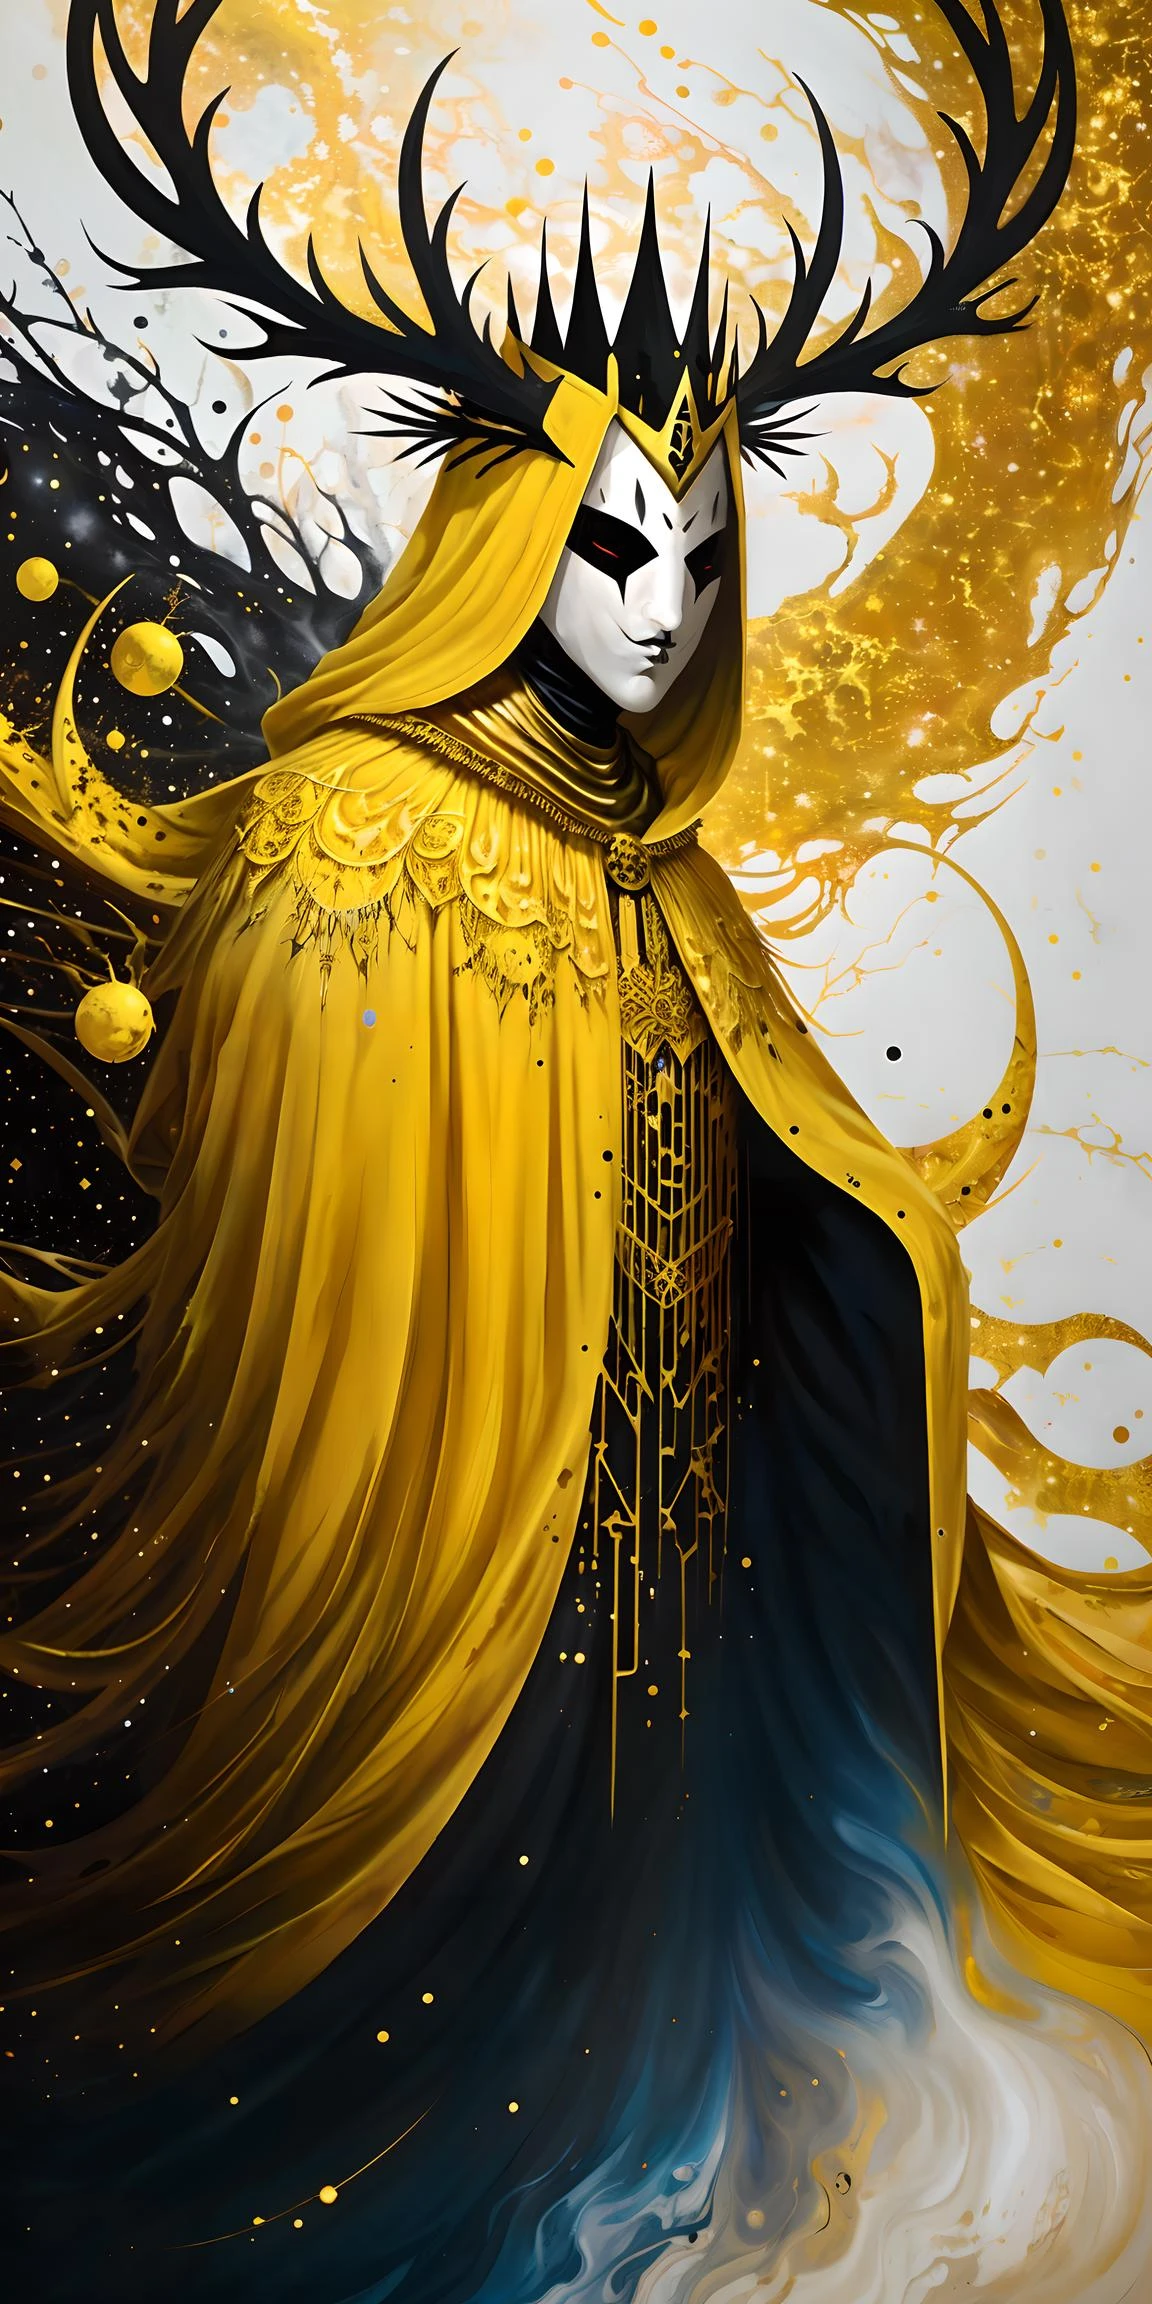 a surreal paint splatter painting of the kinginyellow wearing a cloak and a mask, antlers, crown, cosmic background, gold and white and black color scheme, (abstract:1.2) 